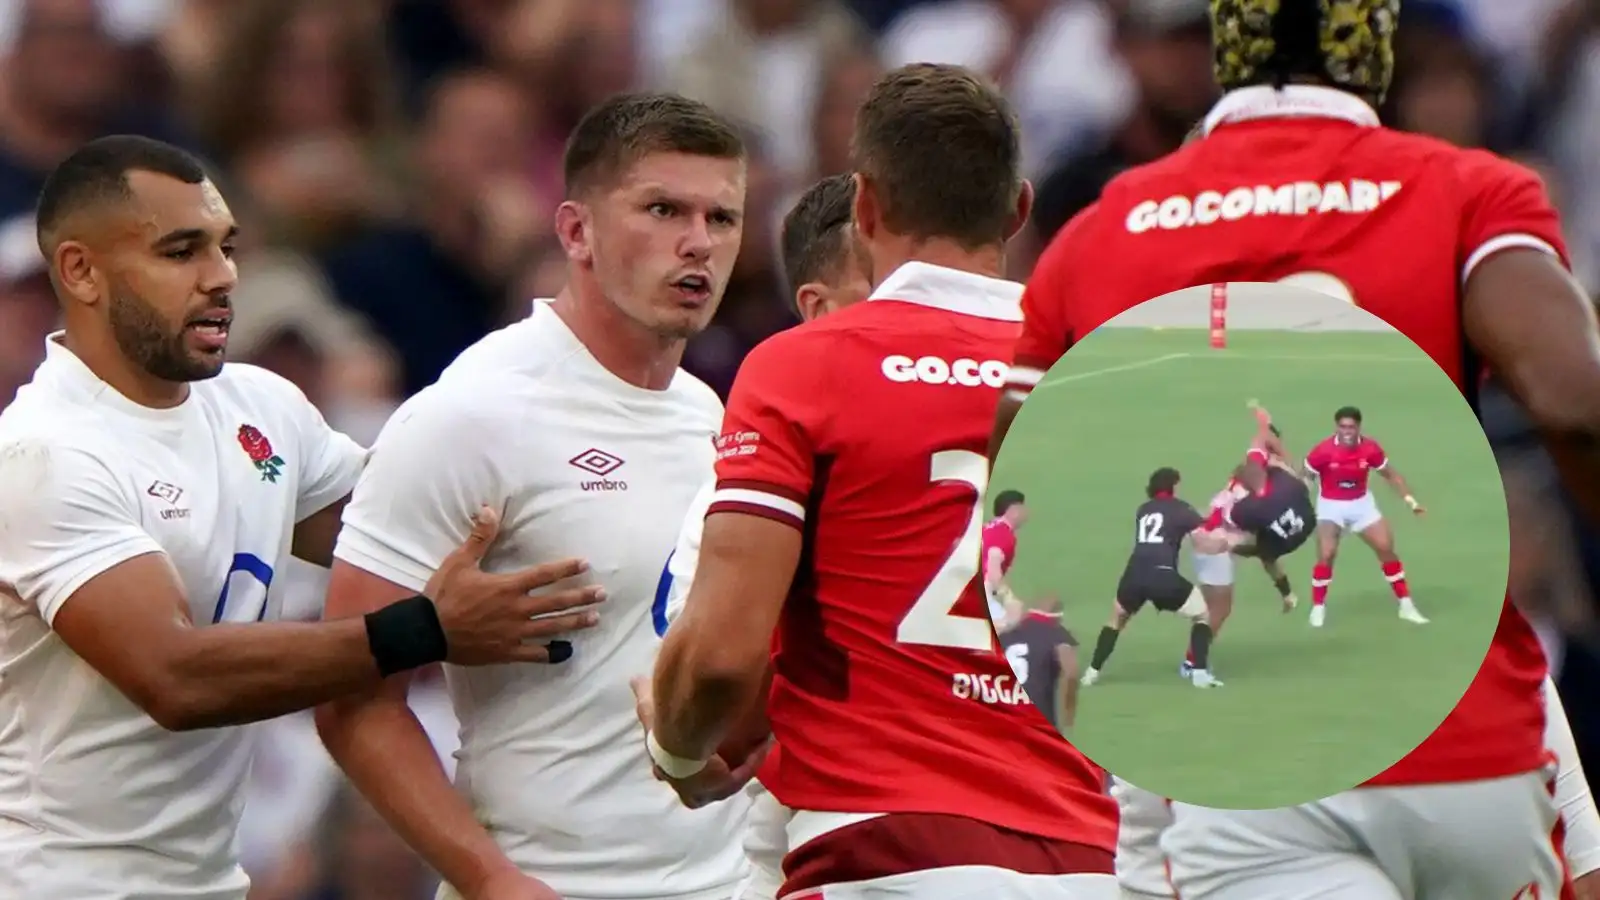 England captain Owen Farrell squares up with Dan Biggar plus an image of Tonga centre George Moala's red card which could rule him out of the Rugby World Cup